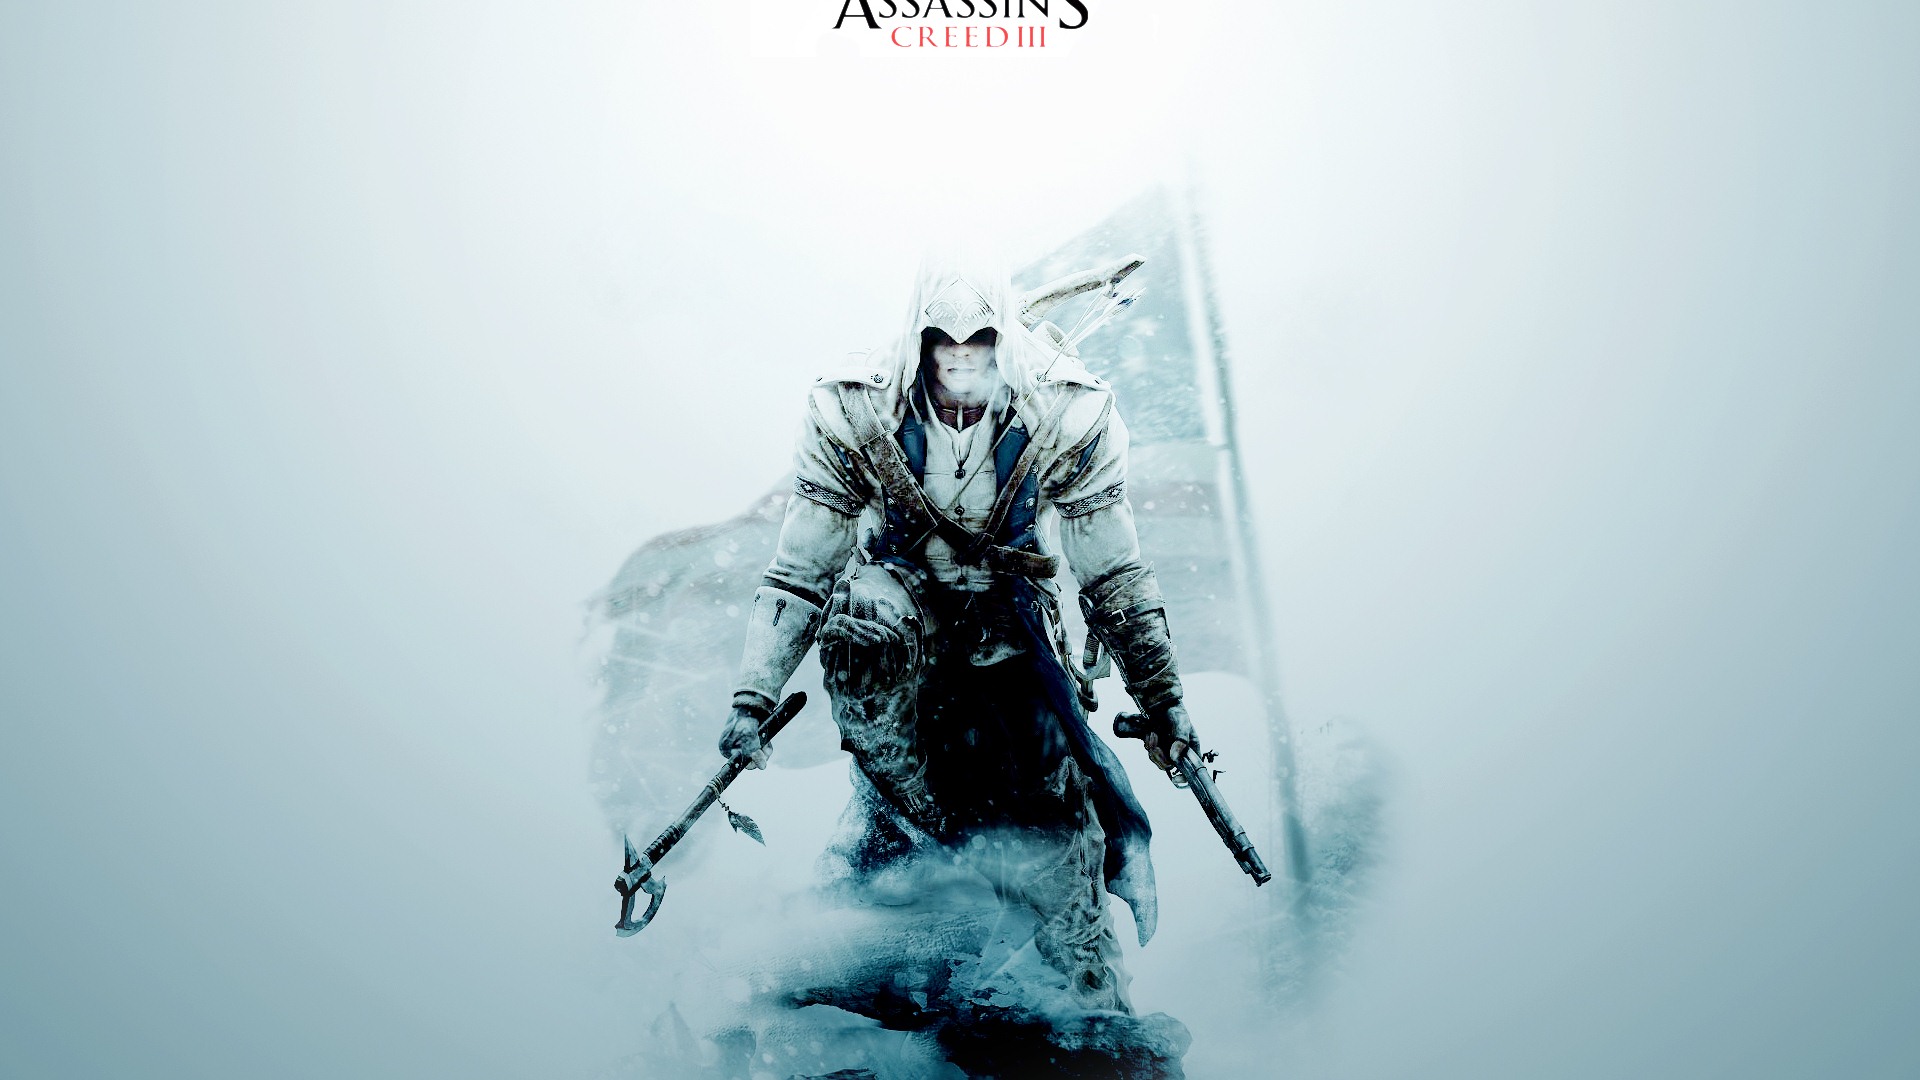 Assassin's Creed 3 HD wallpapers #11 - 1920x1080